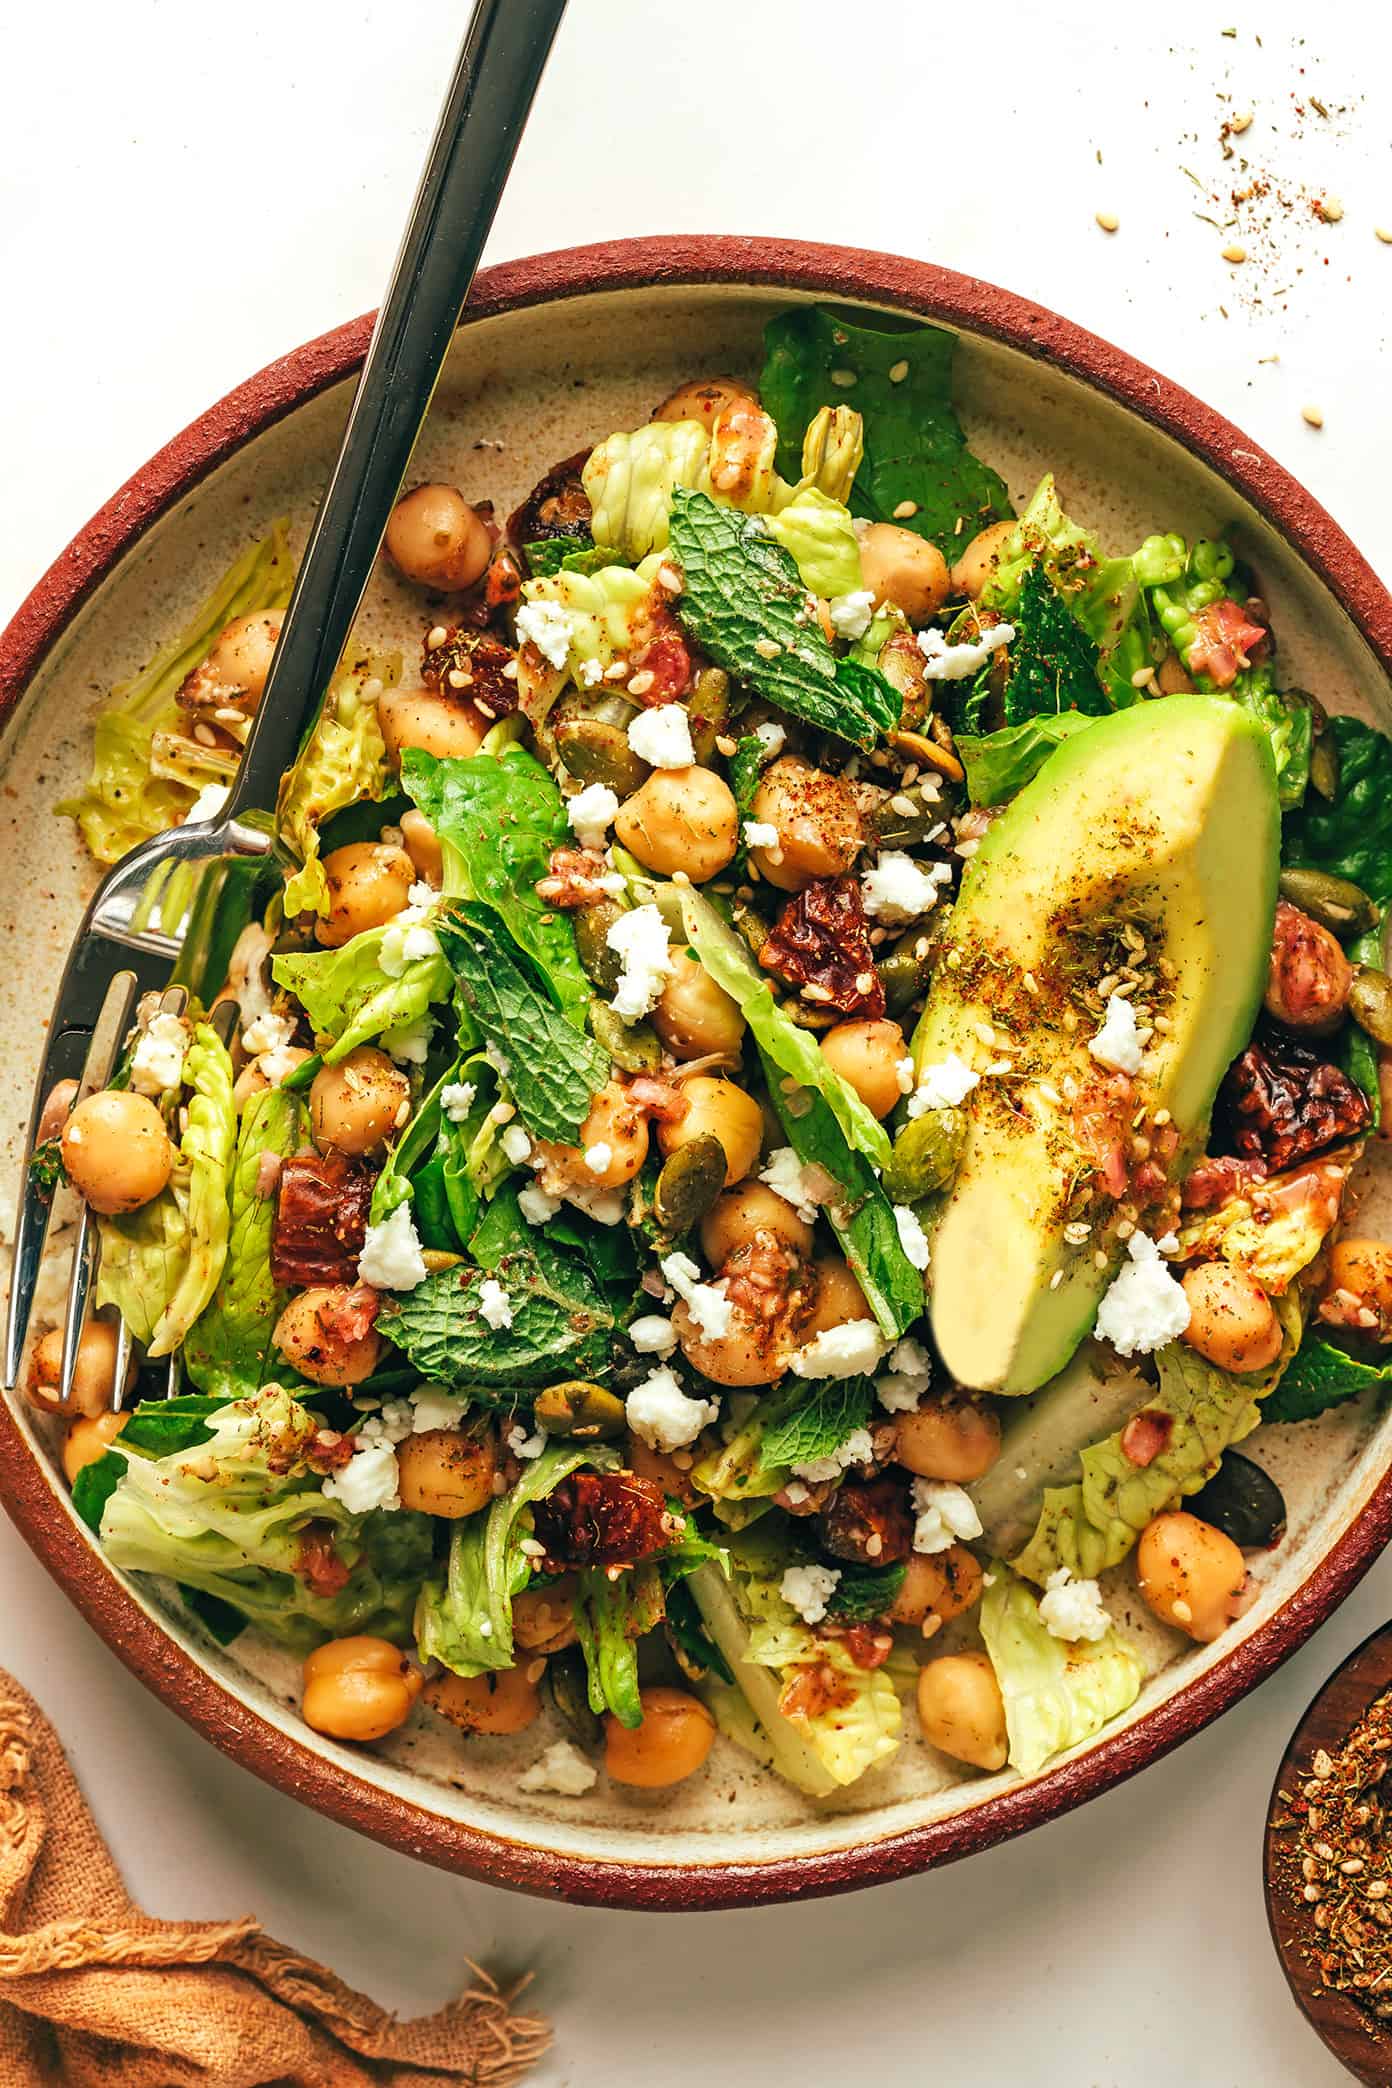 Chickpea avocado and avocado green salad with za'atar vinaigrette in serving bowl with fork